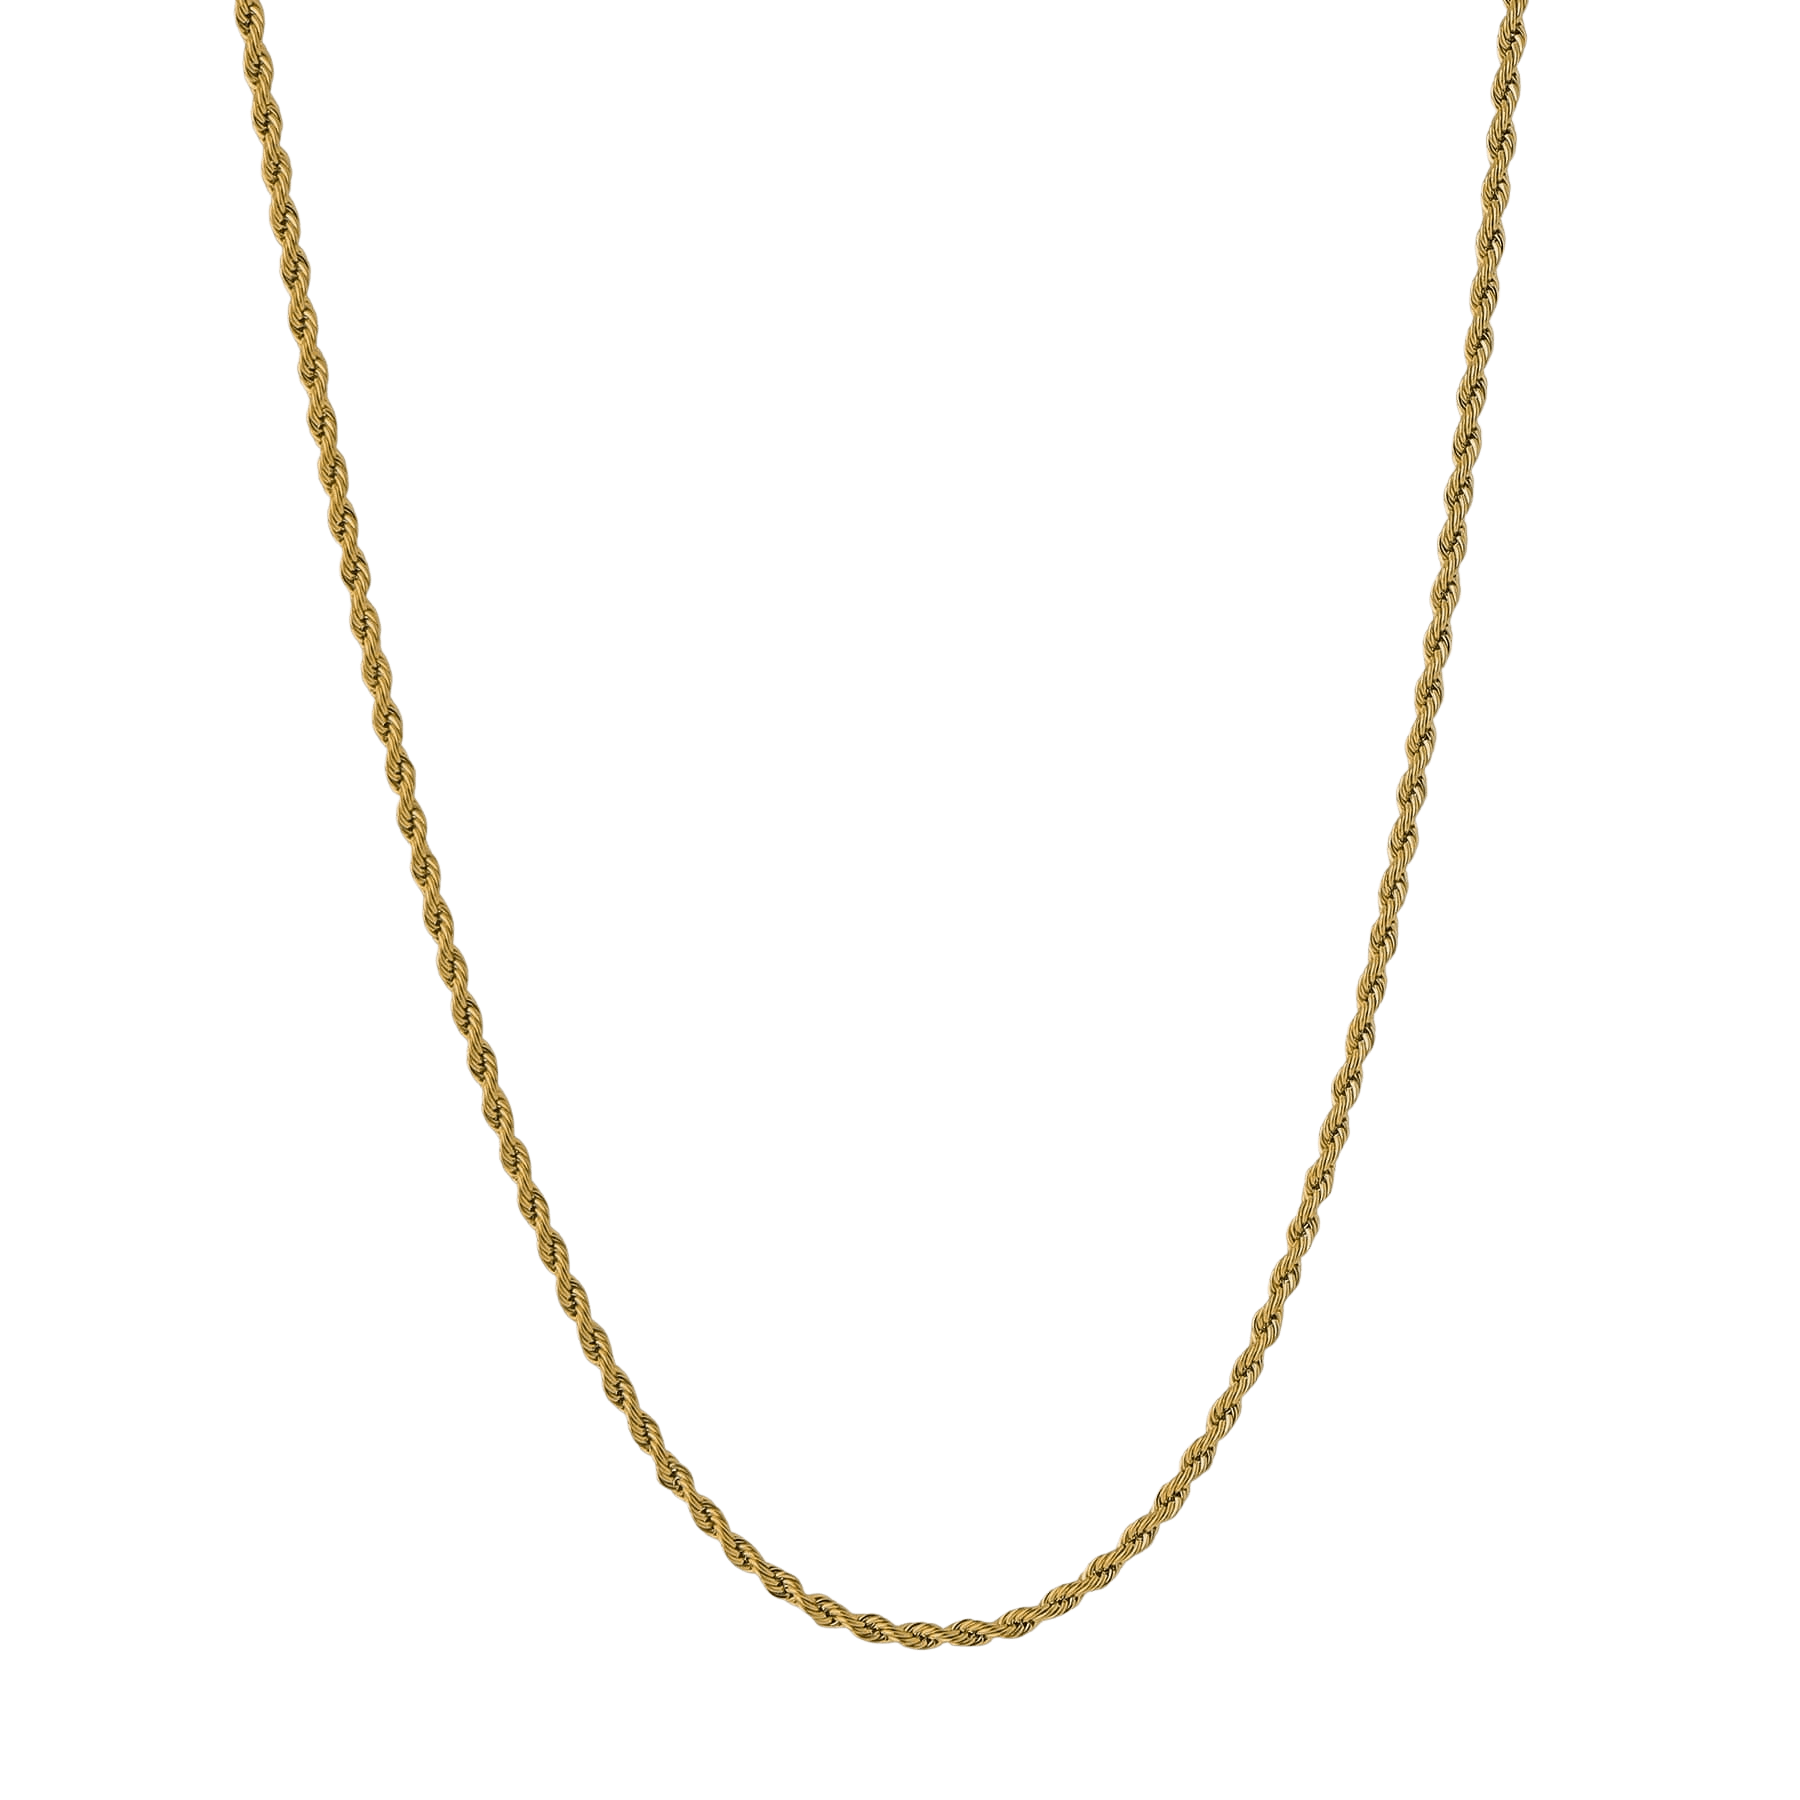 Gold Dipped Chains 24 inches / 18K Gold Rope Chain 3mm - Gold